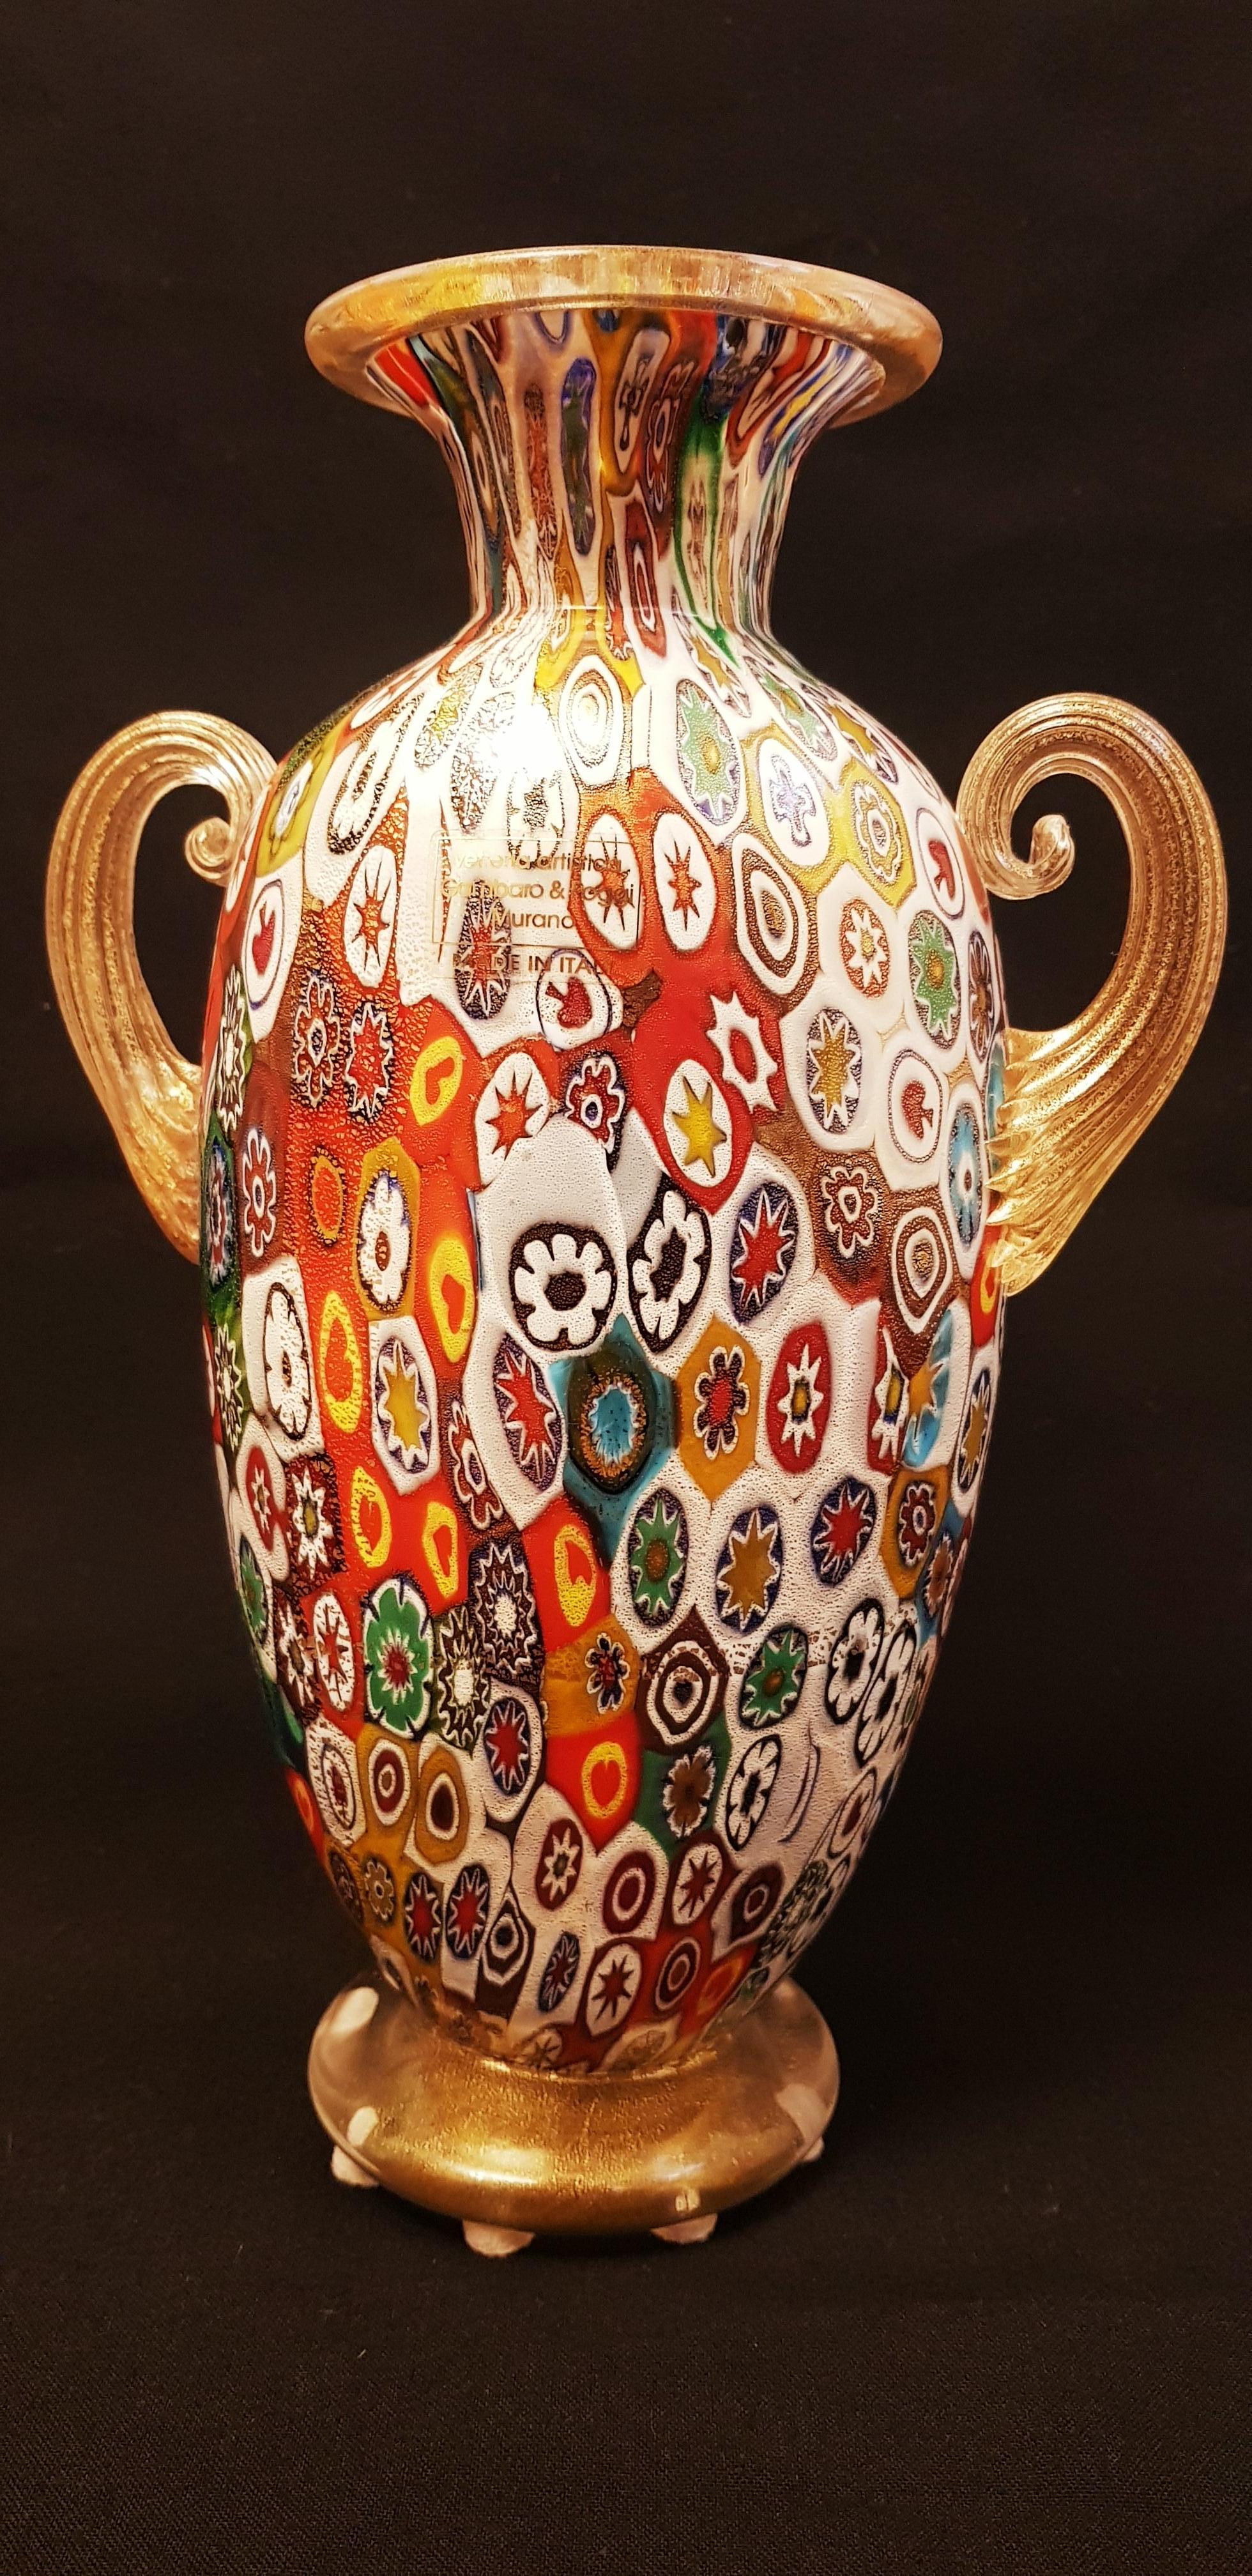 Beautiful murano glass millefiori vase with gold leaf by Gambaro&Poggi, labelled and acid stamped, brilliant condition. 